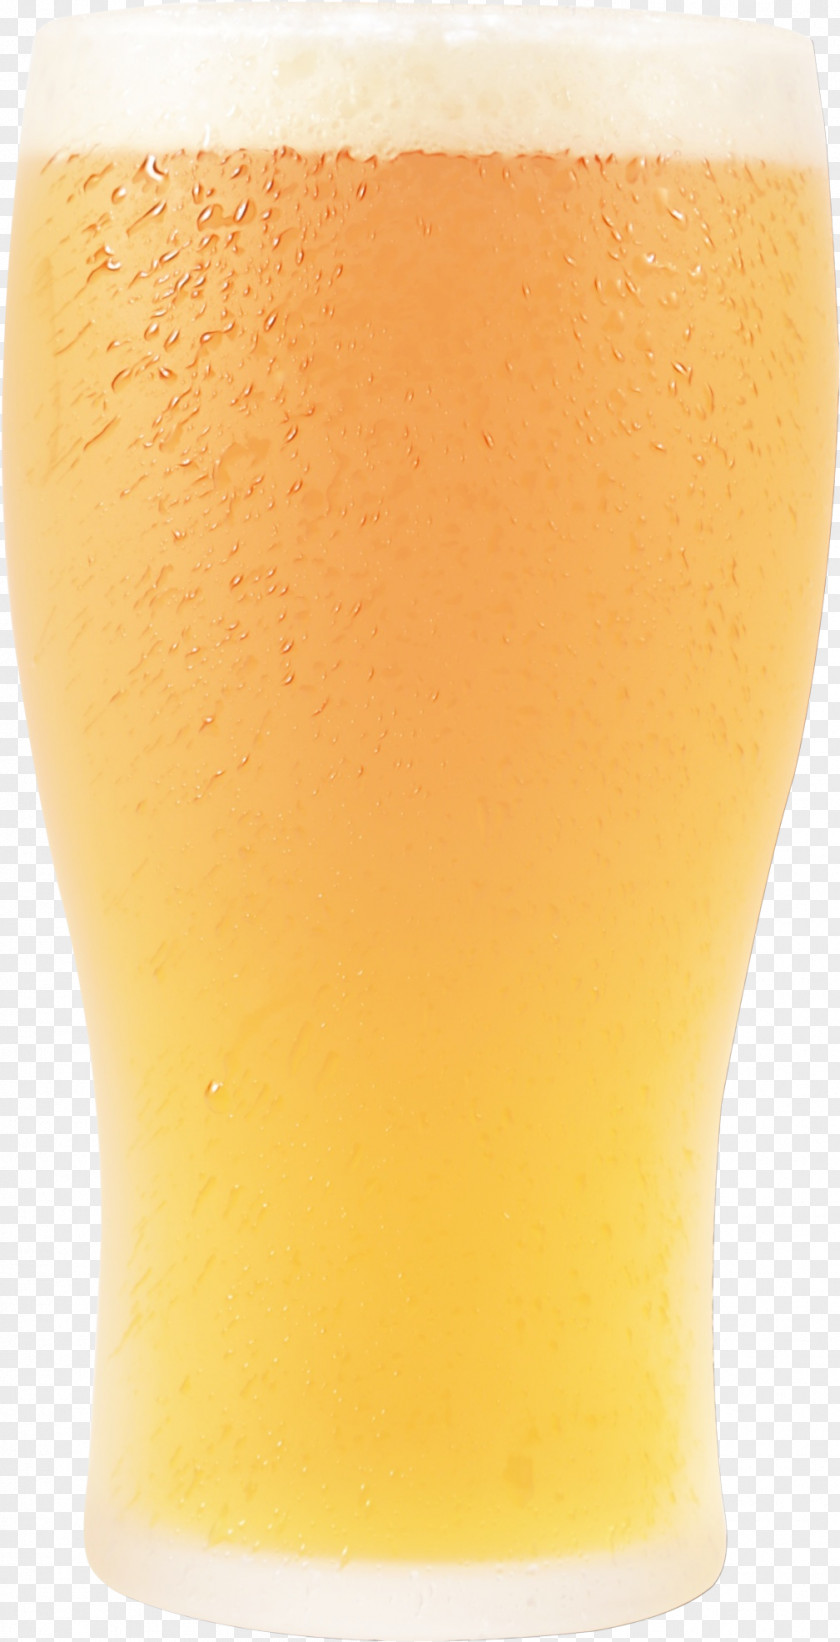 Champagne Cocktail Juice Beer Glass Drink Pint Yellow Wheat PNG